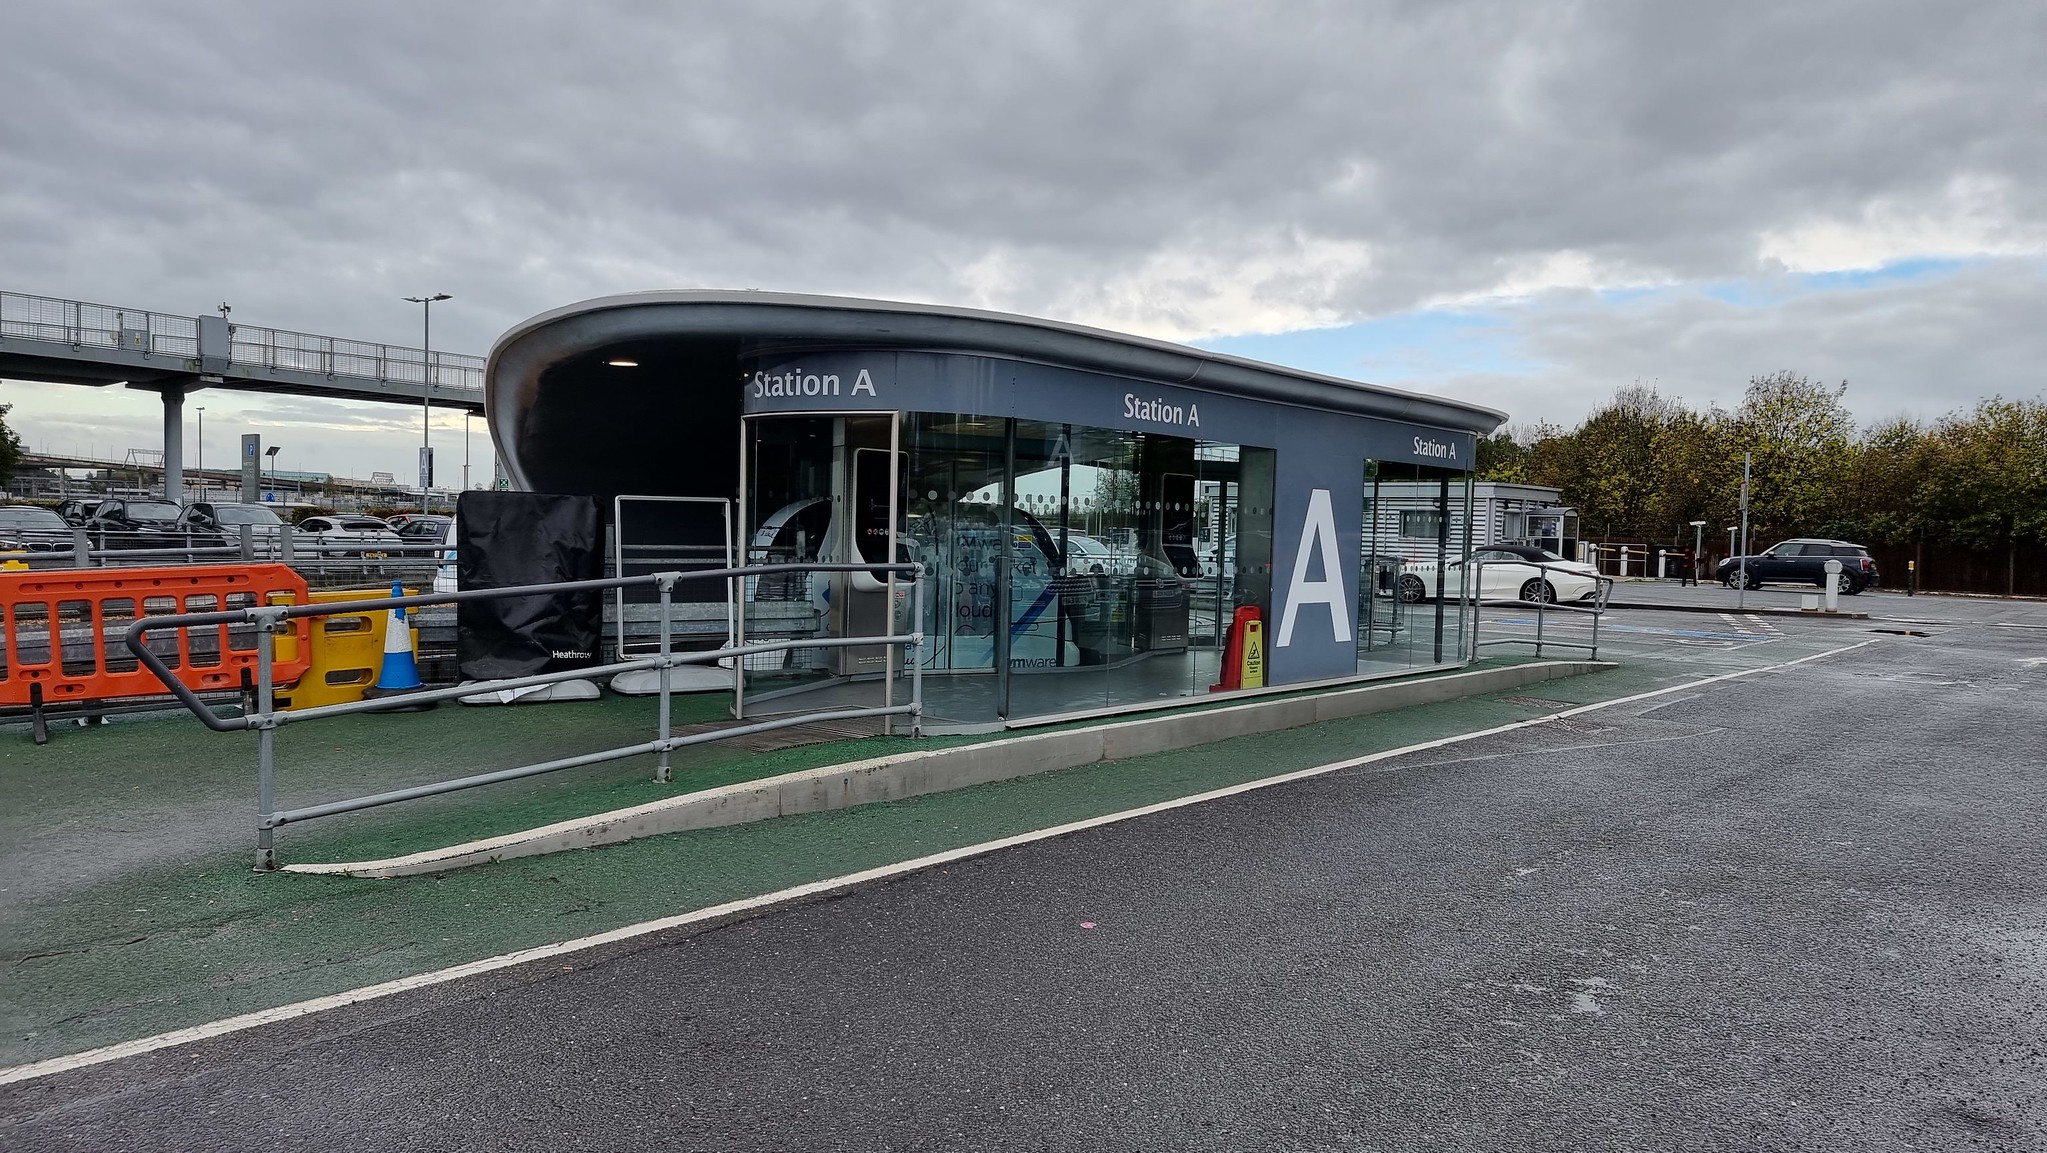 The POD parking station at Heathrow T5